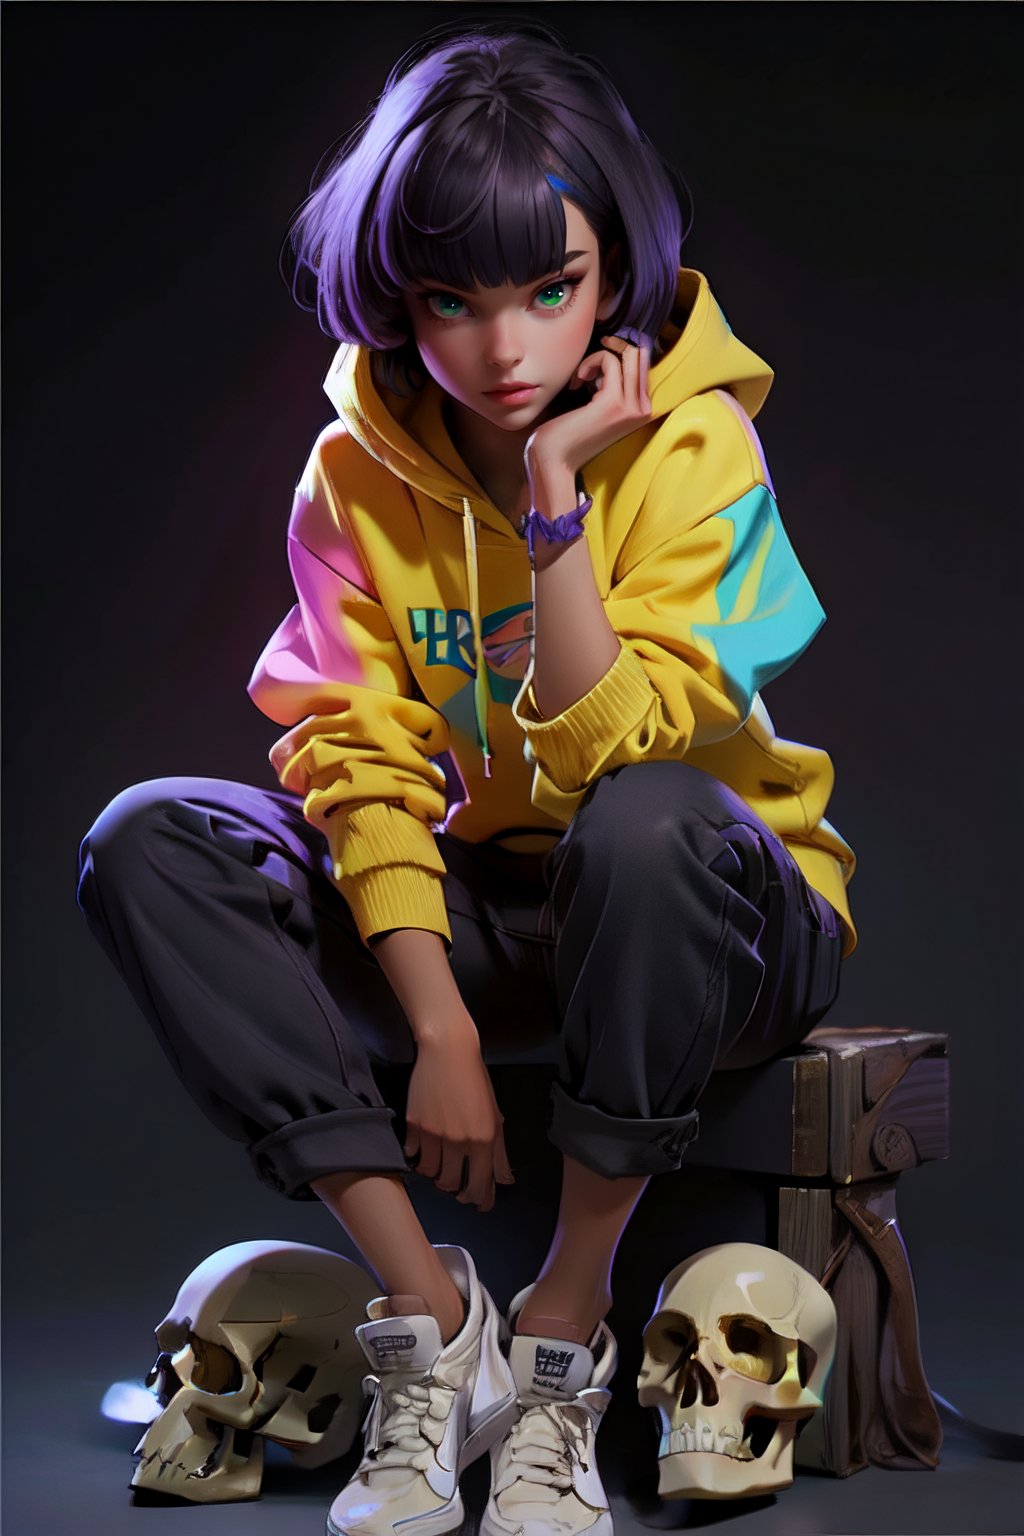 (masterpiece), (full body portrait), oil painting style, girl sitting down, hyper-detailed face, a girl with long rainbow hair with bangs, very pale skin, wearing a purple hoodie, dark background with skulls, highly detailed, realistic,Fechin